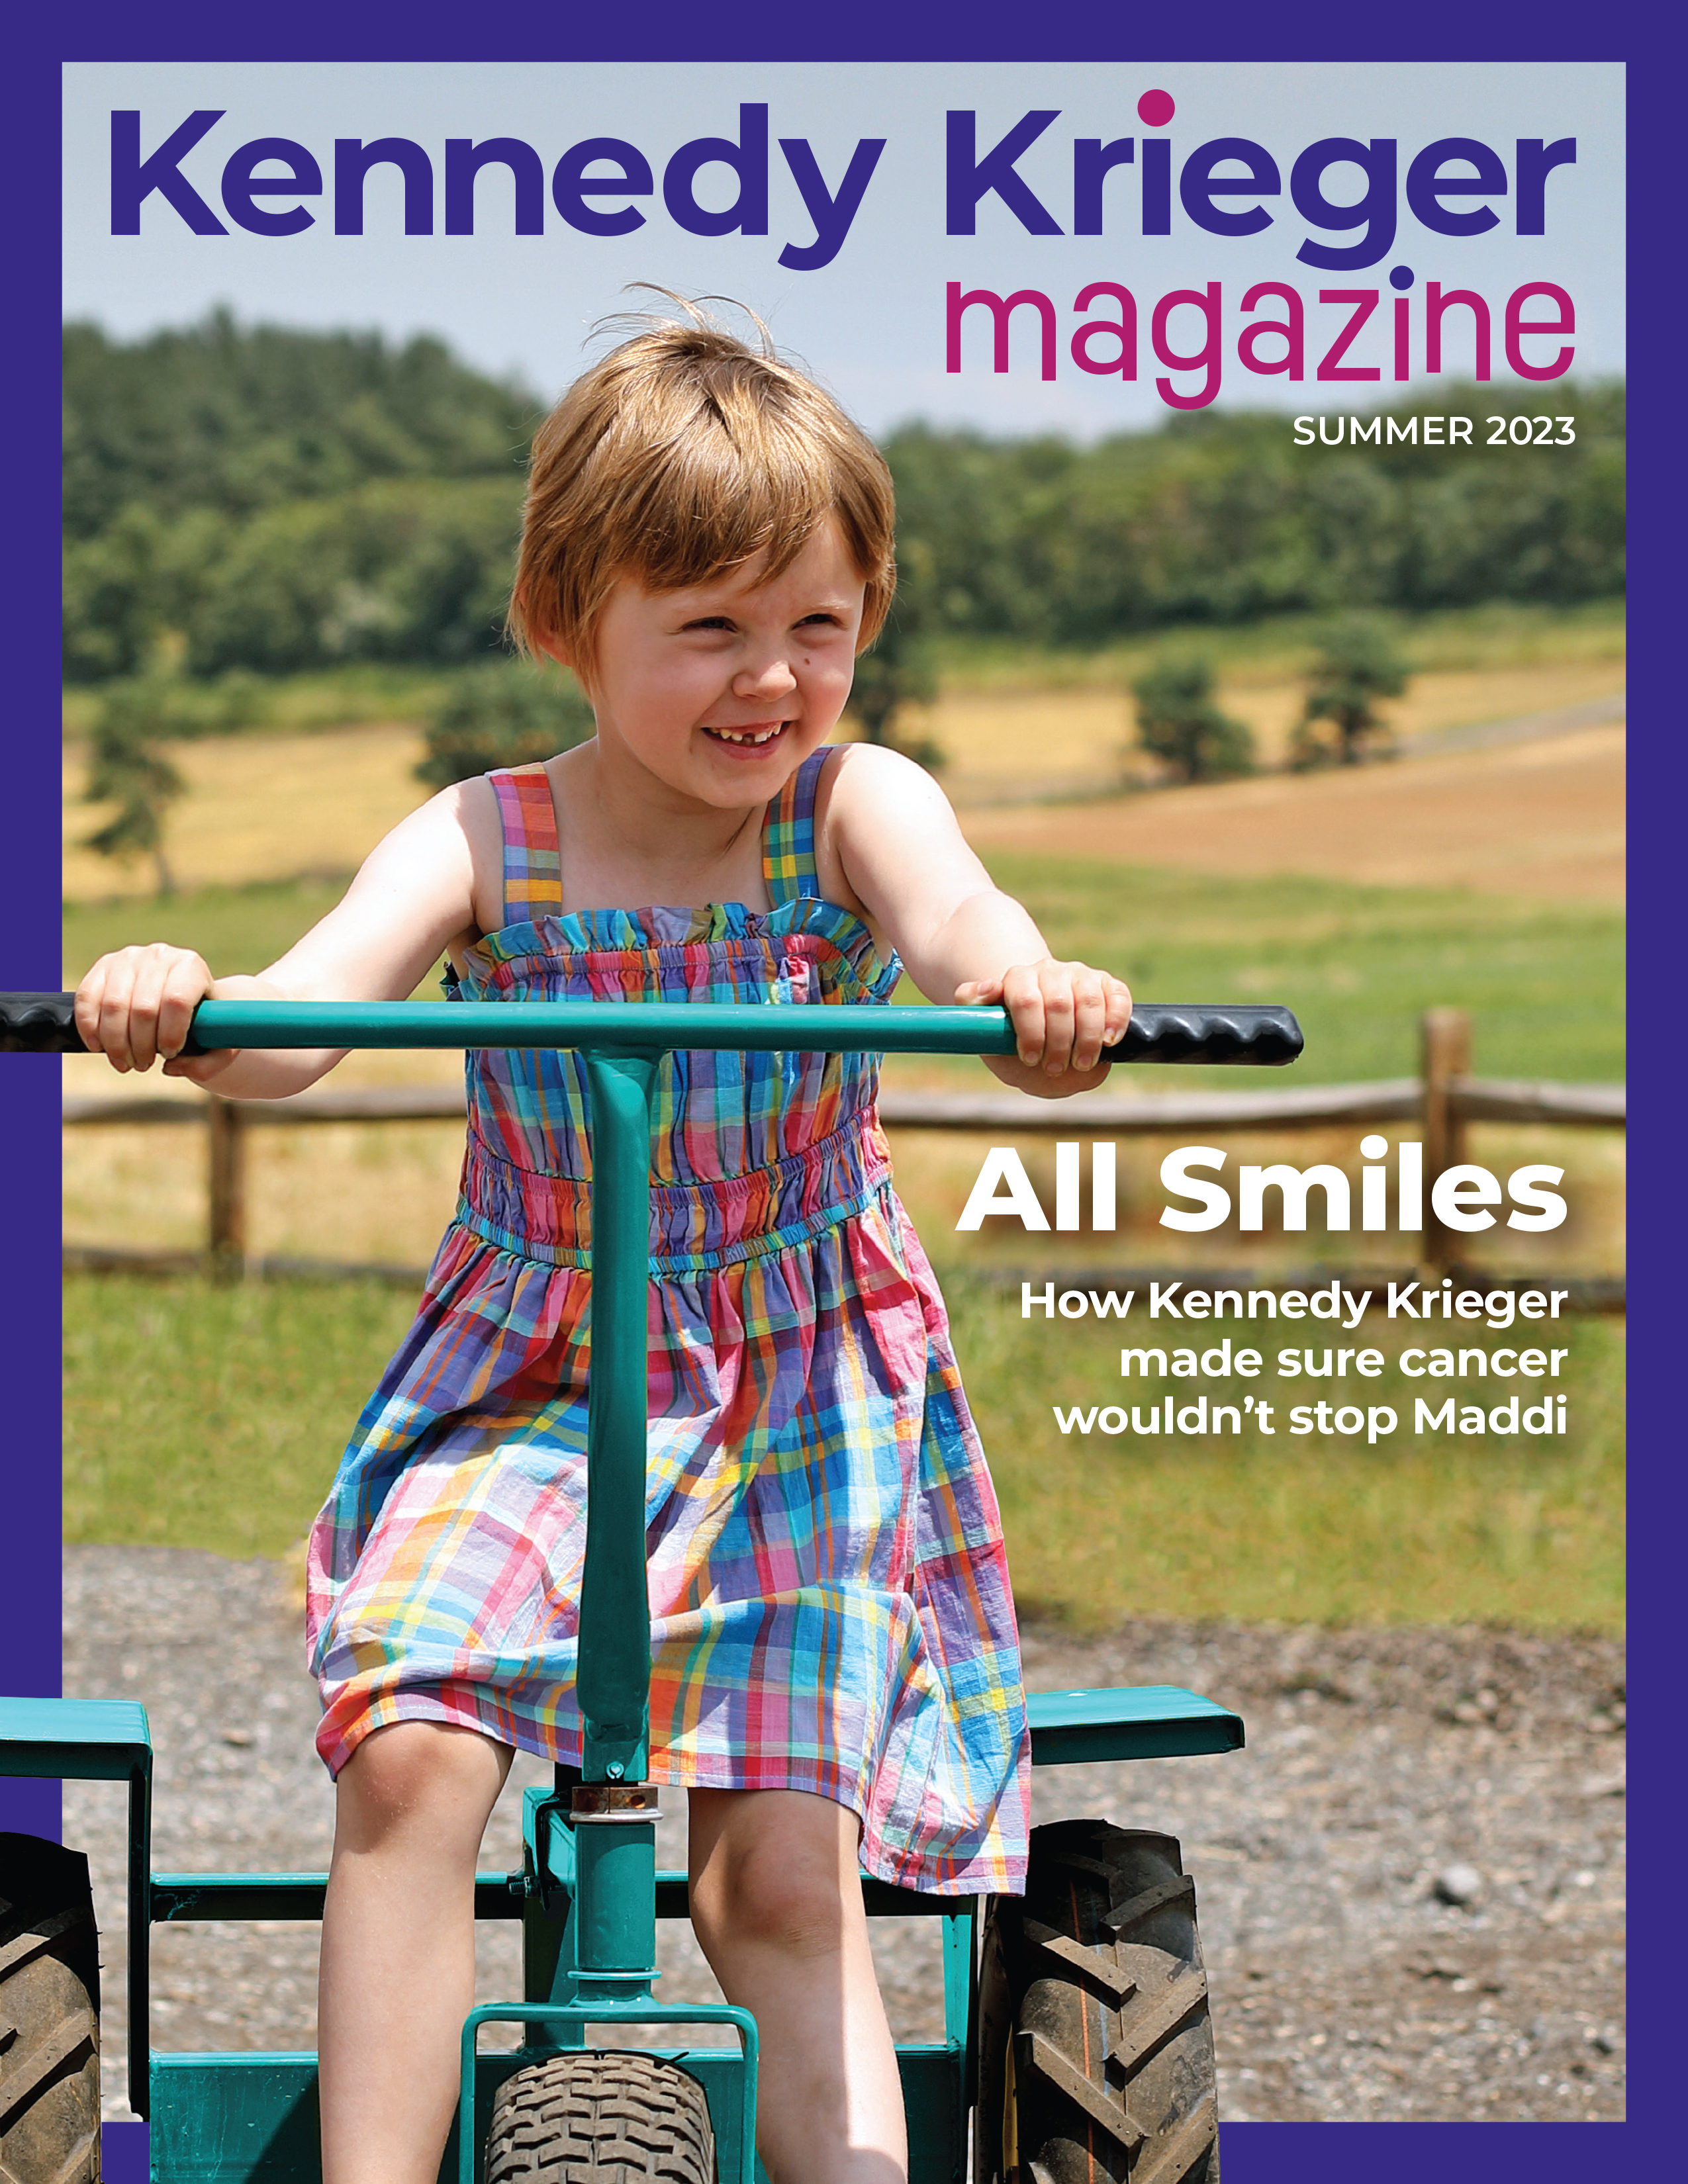 Kennedy Krieger Summer 2023 Cover. The cover features a light purple border around an image of a young girl riding a green tricycle in a rural setting. The cover text reads All Smile How Kennedy Krieger made sure cancer wouldn't stop Madi. 